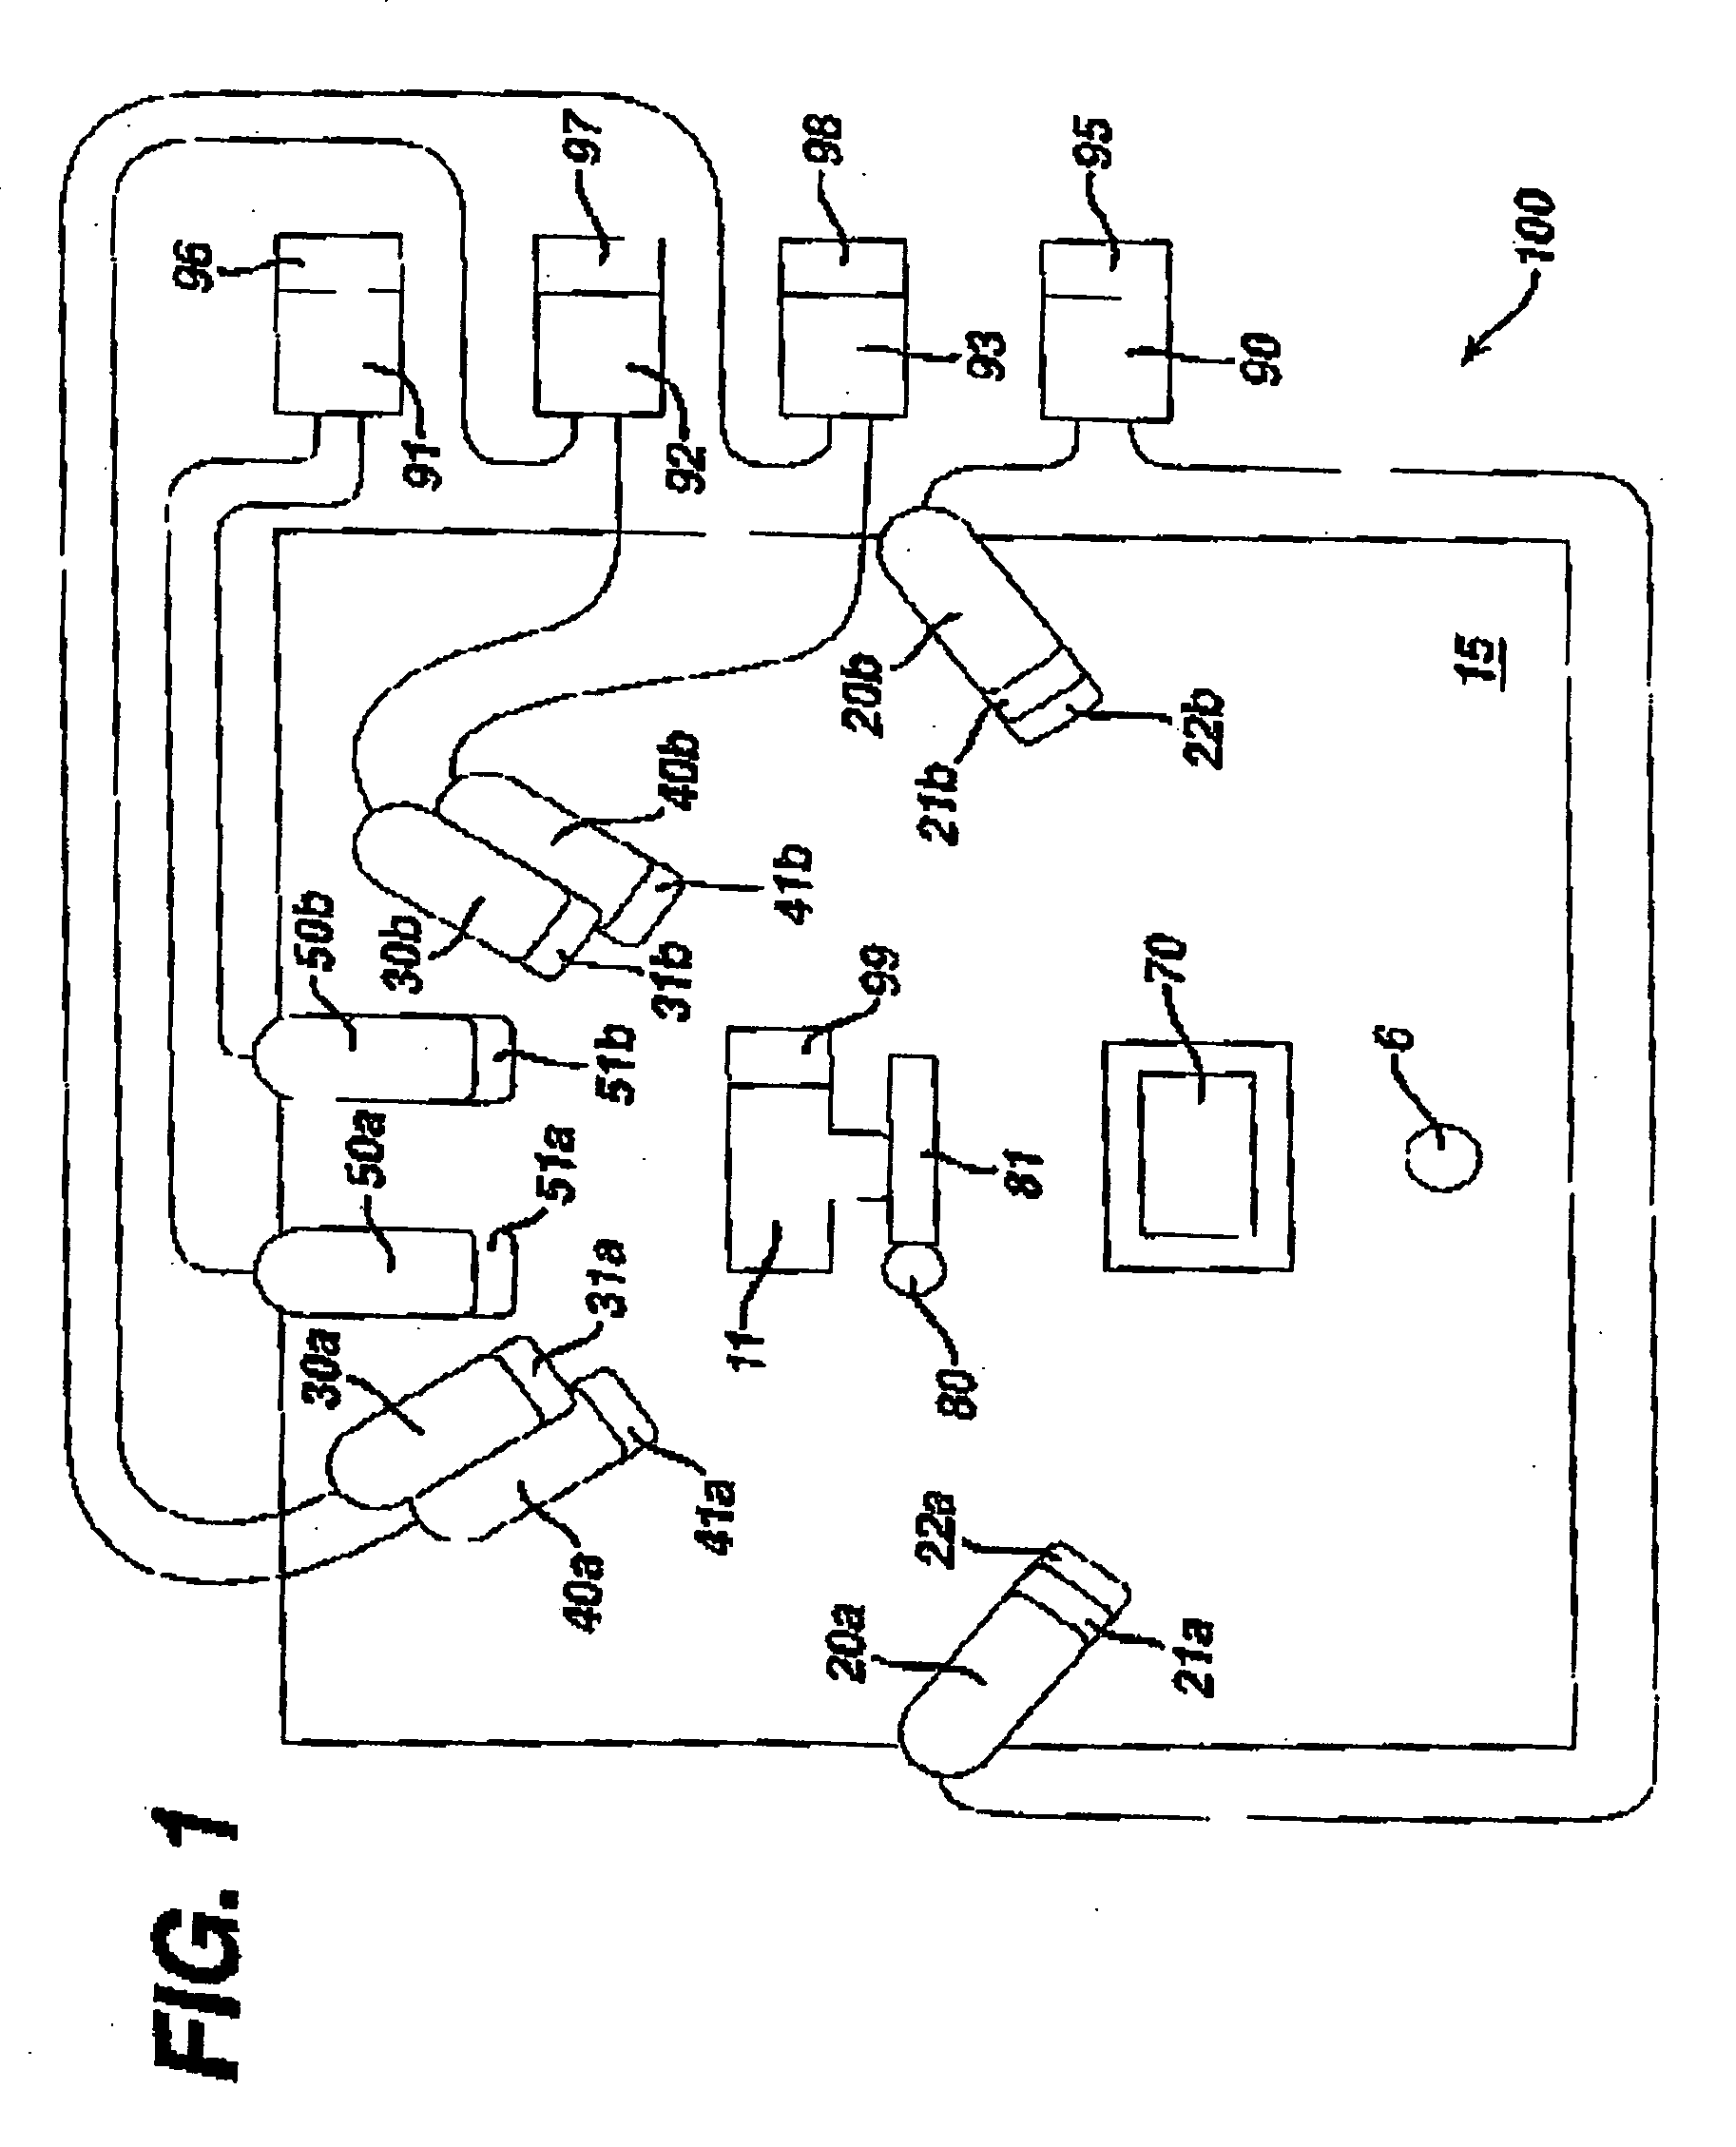 Apparatus for and method of taking and viewing images of the skin